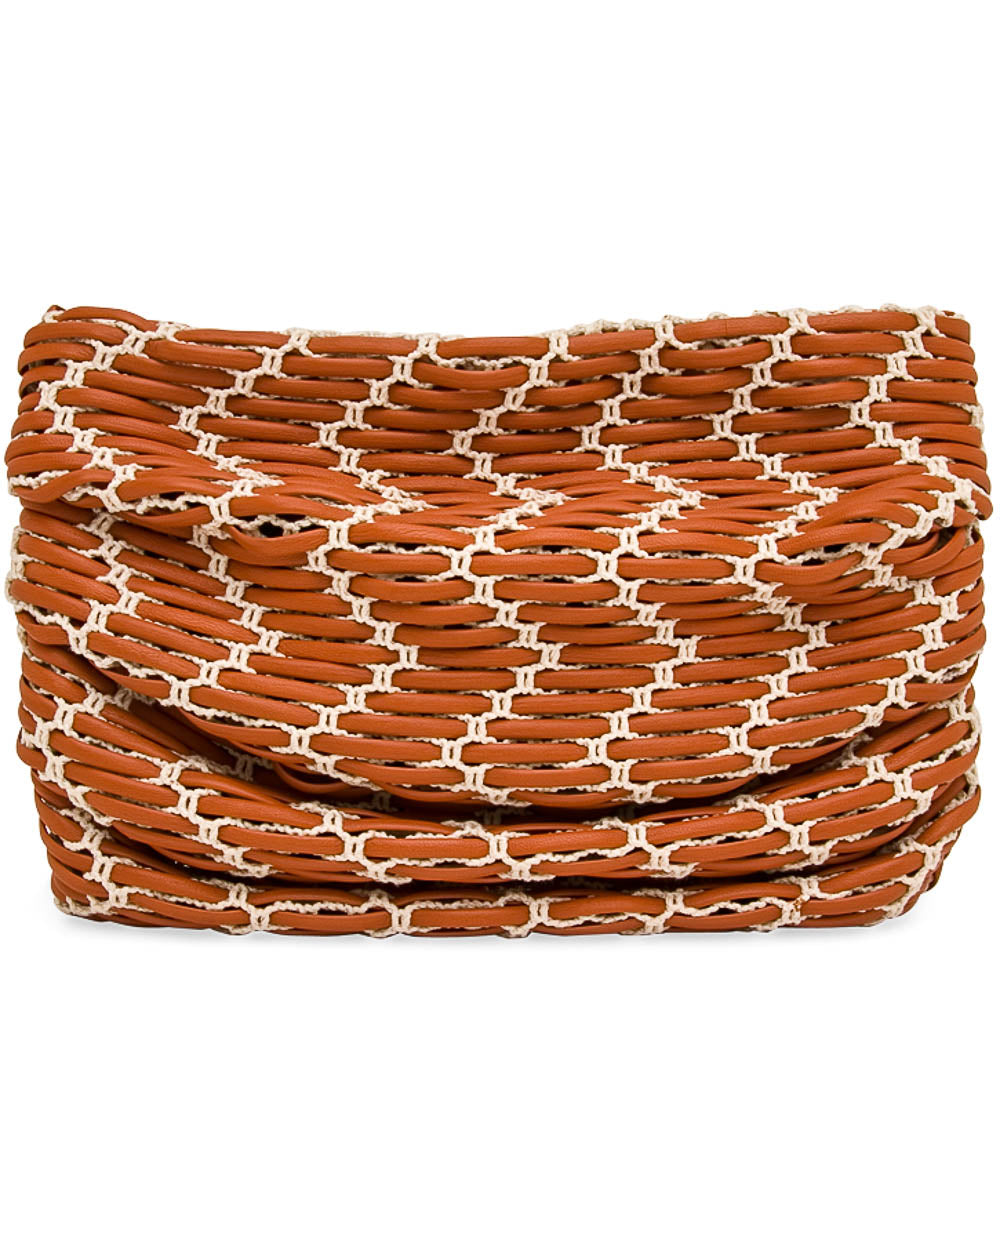 Abby Soft Ruched Clutch in Brick